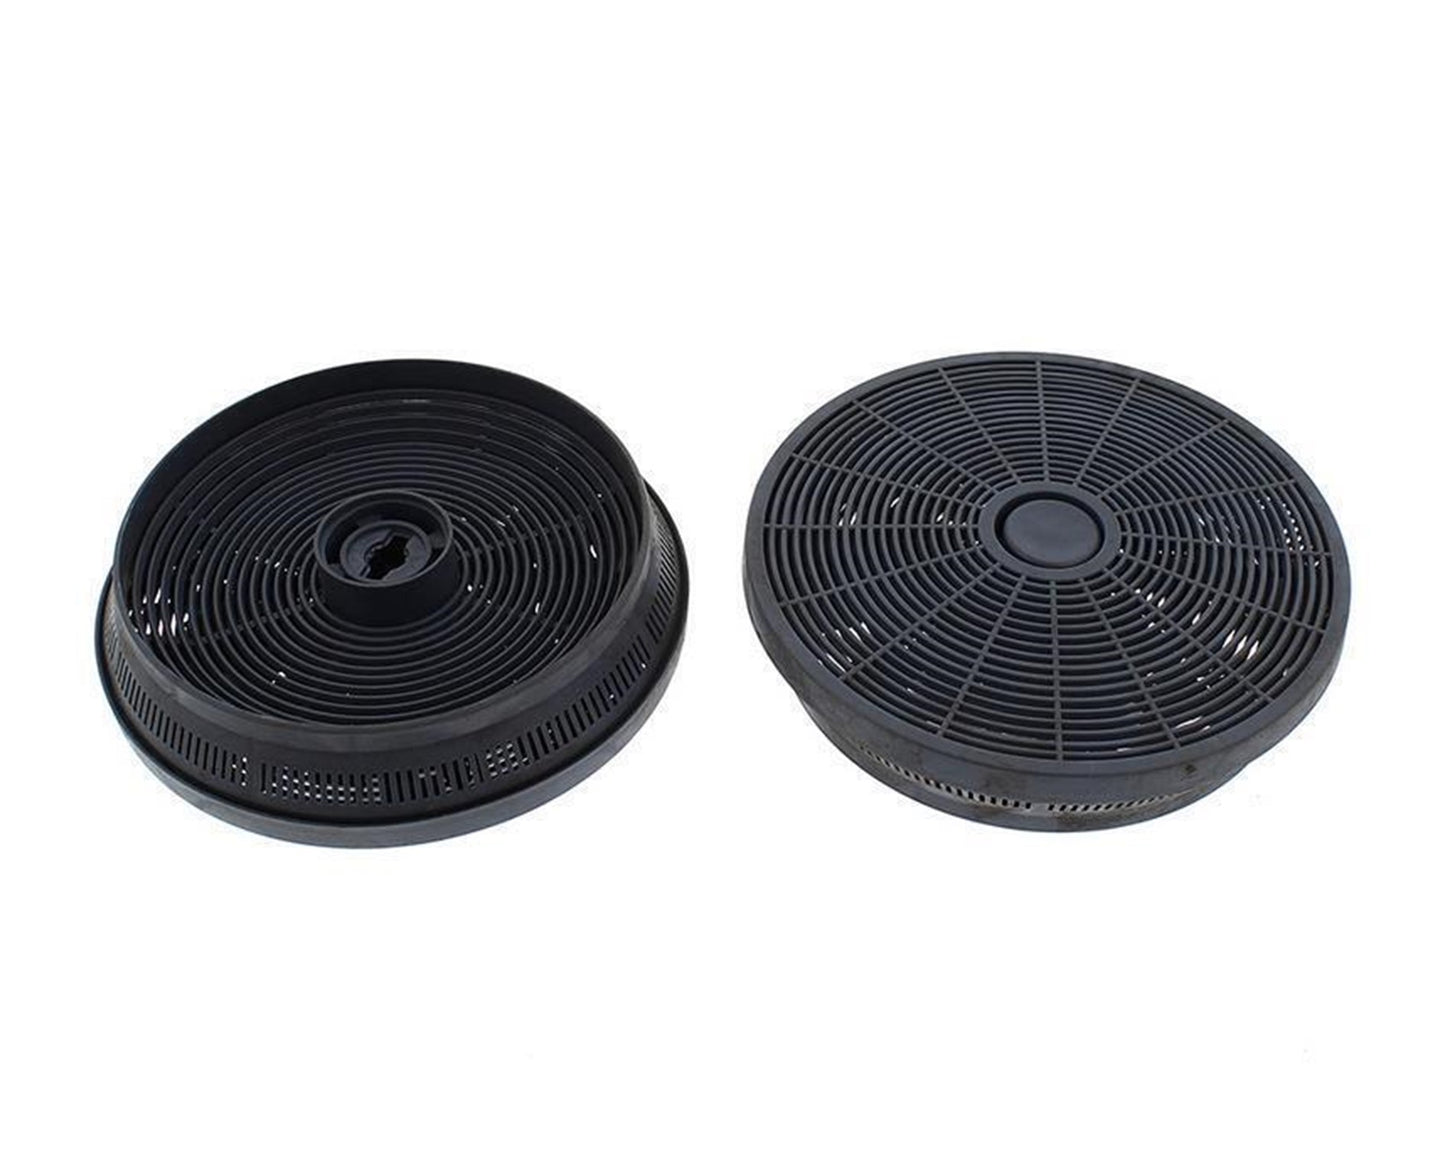 2 Pack Charcoal Carbon Cooker Hood Grease Filters for New World 444445421, 444449650, UIH60S - 082620630